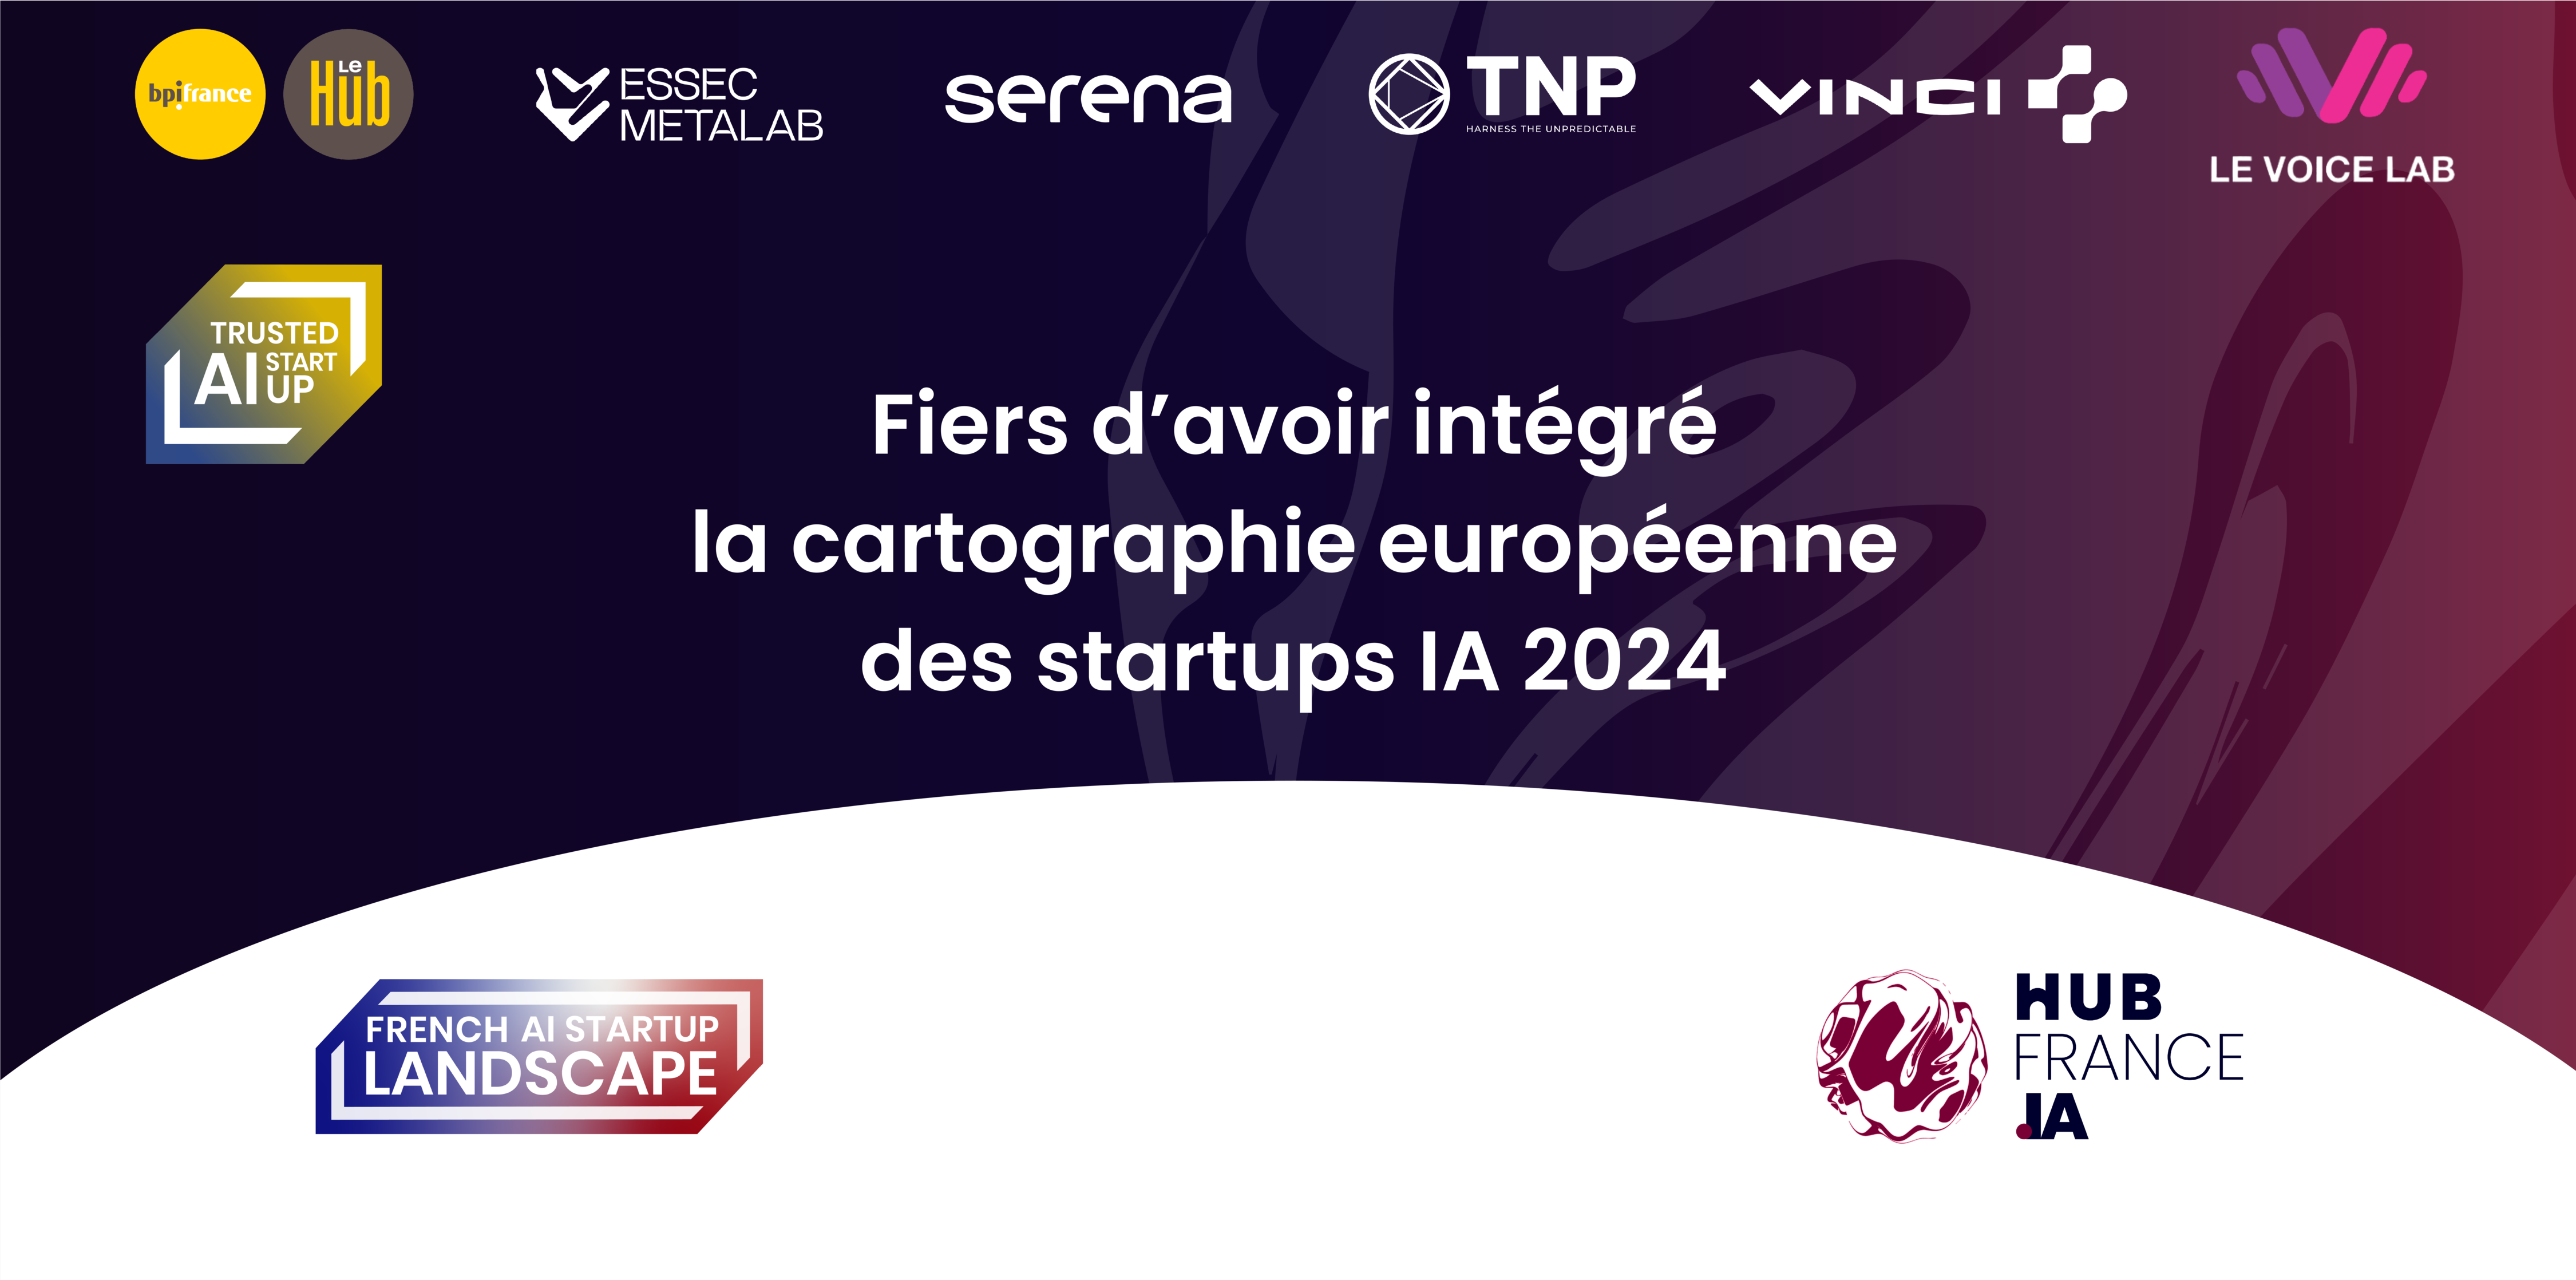 We are proud to be part of the map of European start-ups in AI 2024! Thank you to Caroline Chopinaud, Chloé Plédel and everyone at the Hub FranceIA for your work in promoting the French ecosystem 🥖 🇫🇷 🥂 We would also like to thank the committee of experts made up of Bpifrance Le Hub (Grégoire Souloy), Serena VC (Raphaël Wat and Matthieu Lavergne), Le Voice Lab (Consuelo Innocenti), VINCI Construction (Camille Vaneenoge), ESSEC Metalab (Benoit Bergeret (Ben)) and TNP Consultants (Frédéric PORTA).